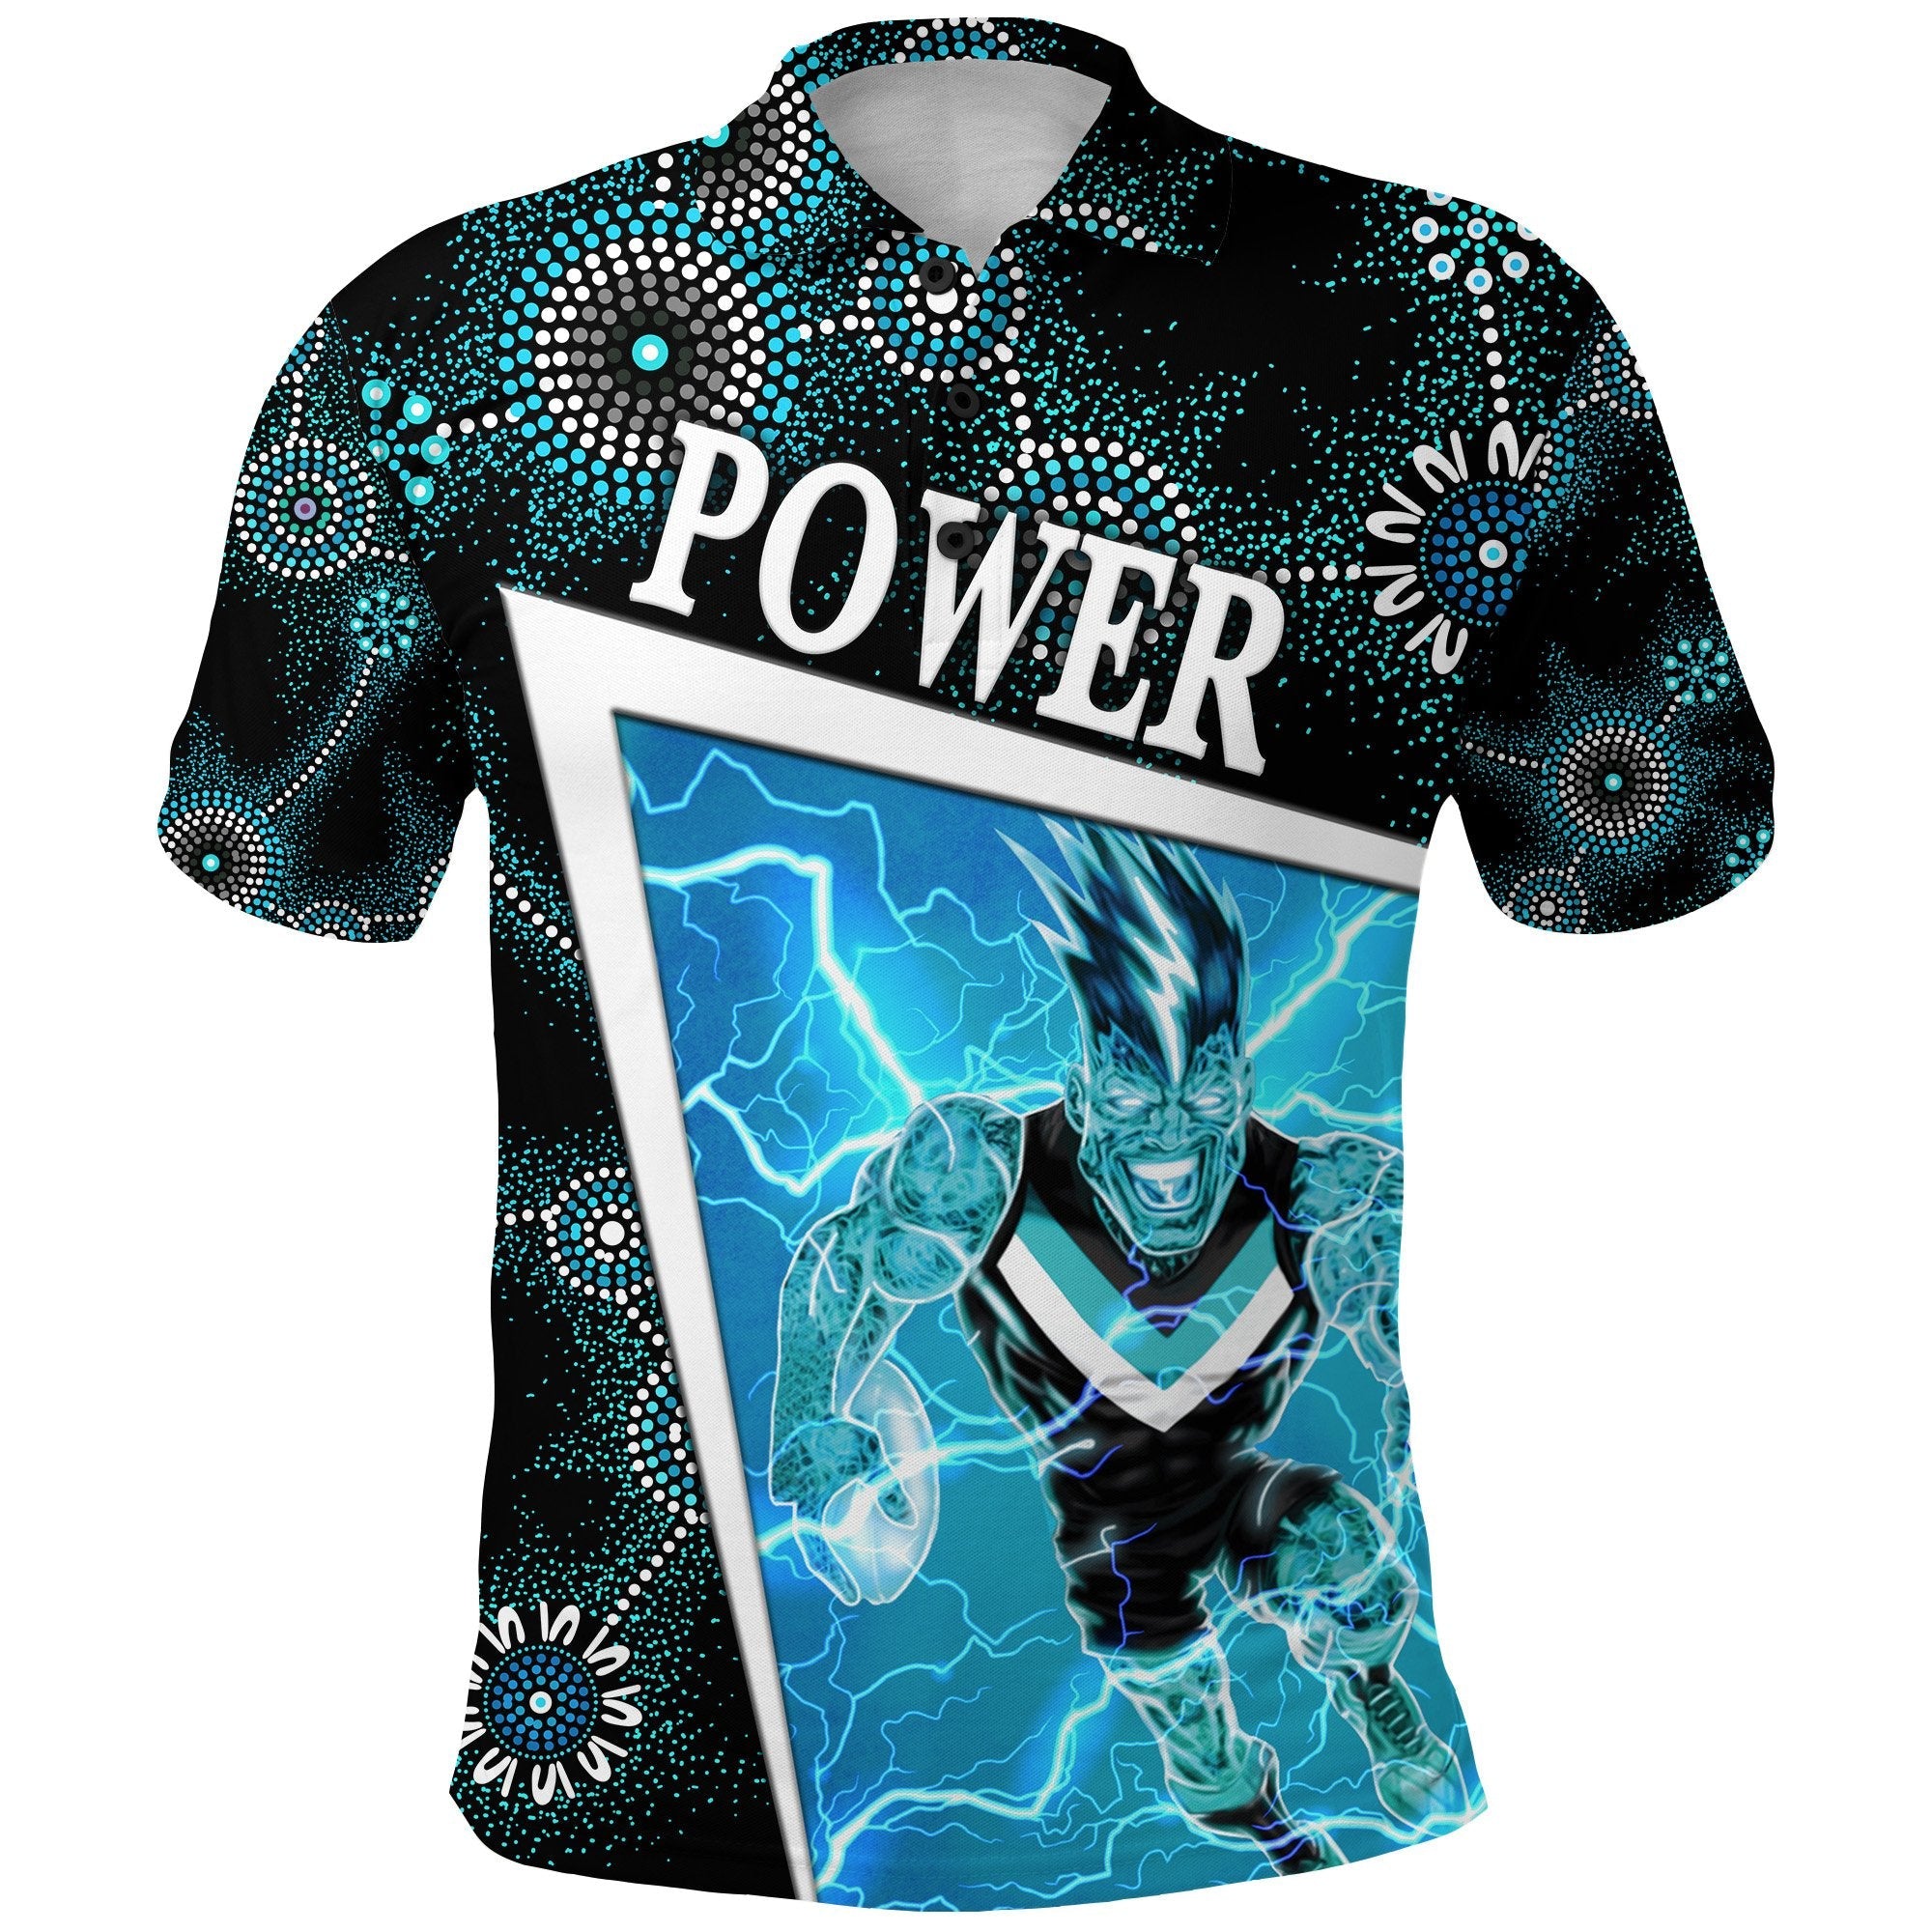 we-are-port-adelaide-polo-shirt-power-limited-edition